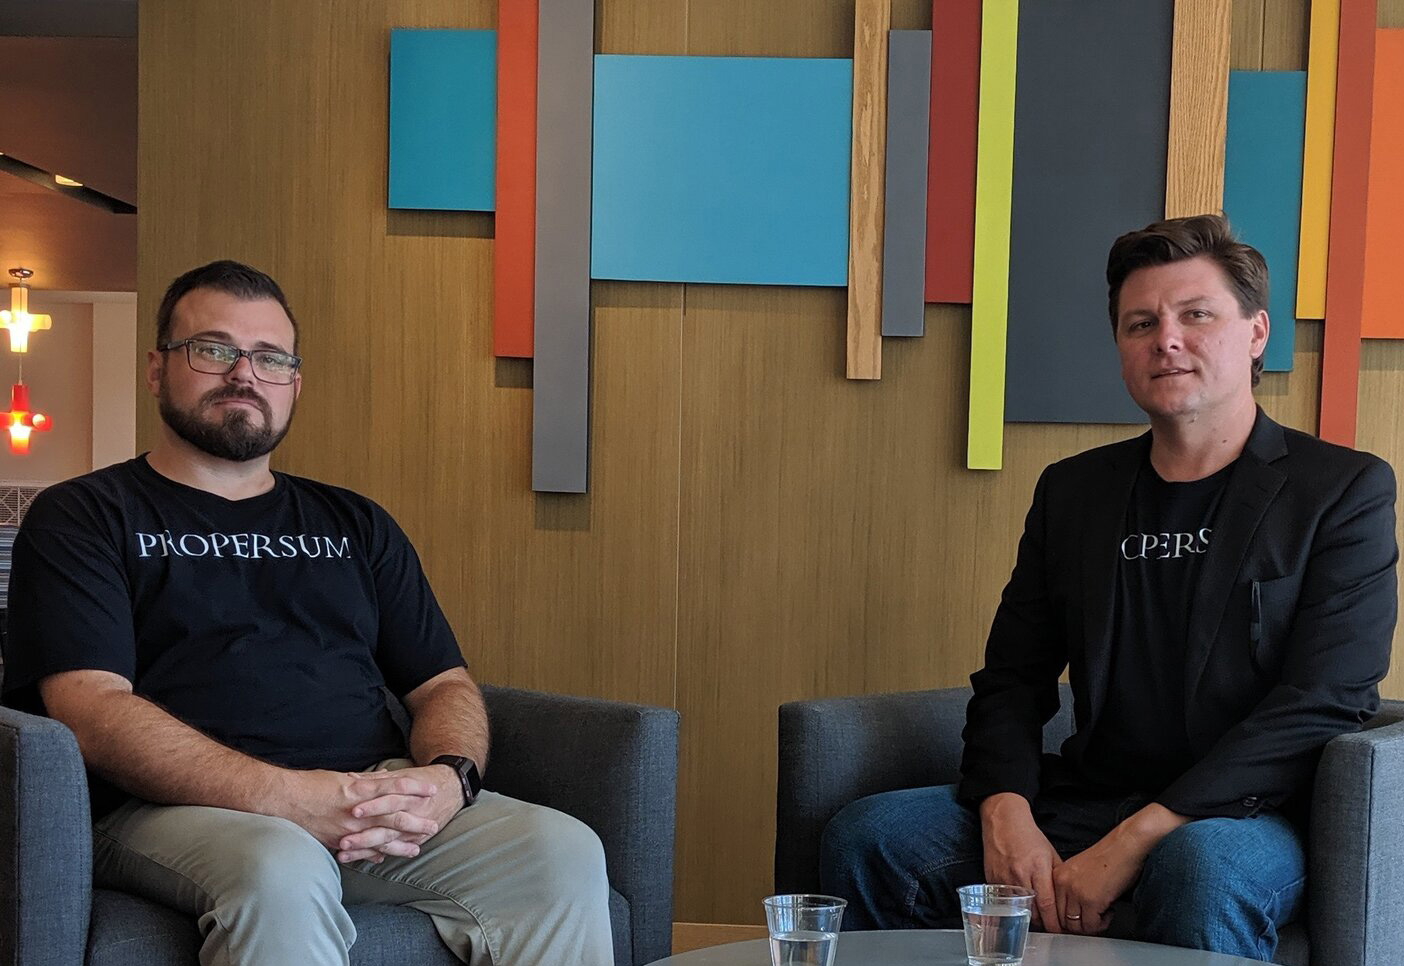 Co-founders Ben Rose, CTO (left) and Wes Walker, CEO (right) founded PROPERSUM in 2019 as a Delaware C Corporation